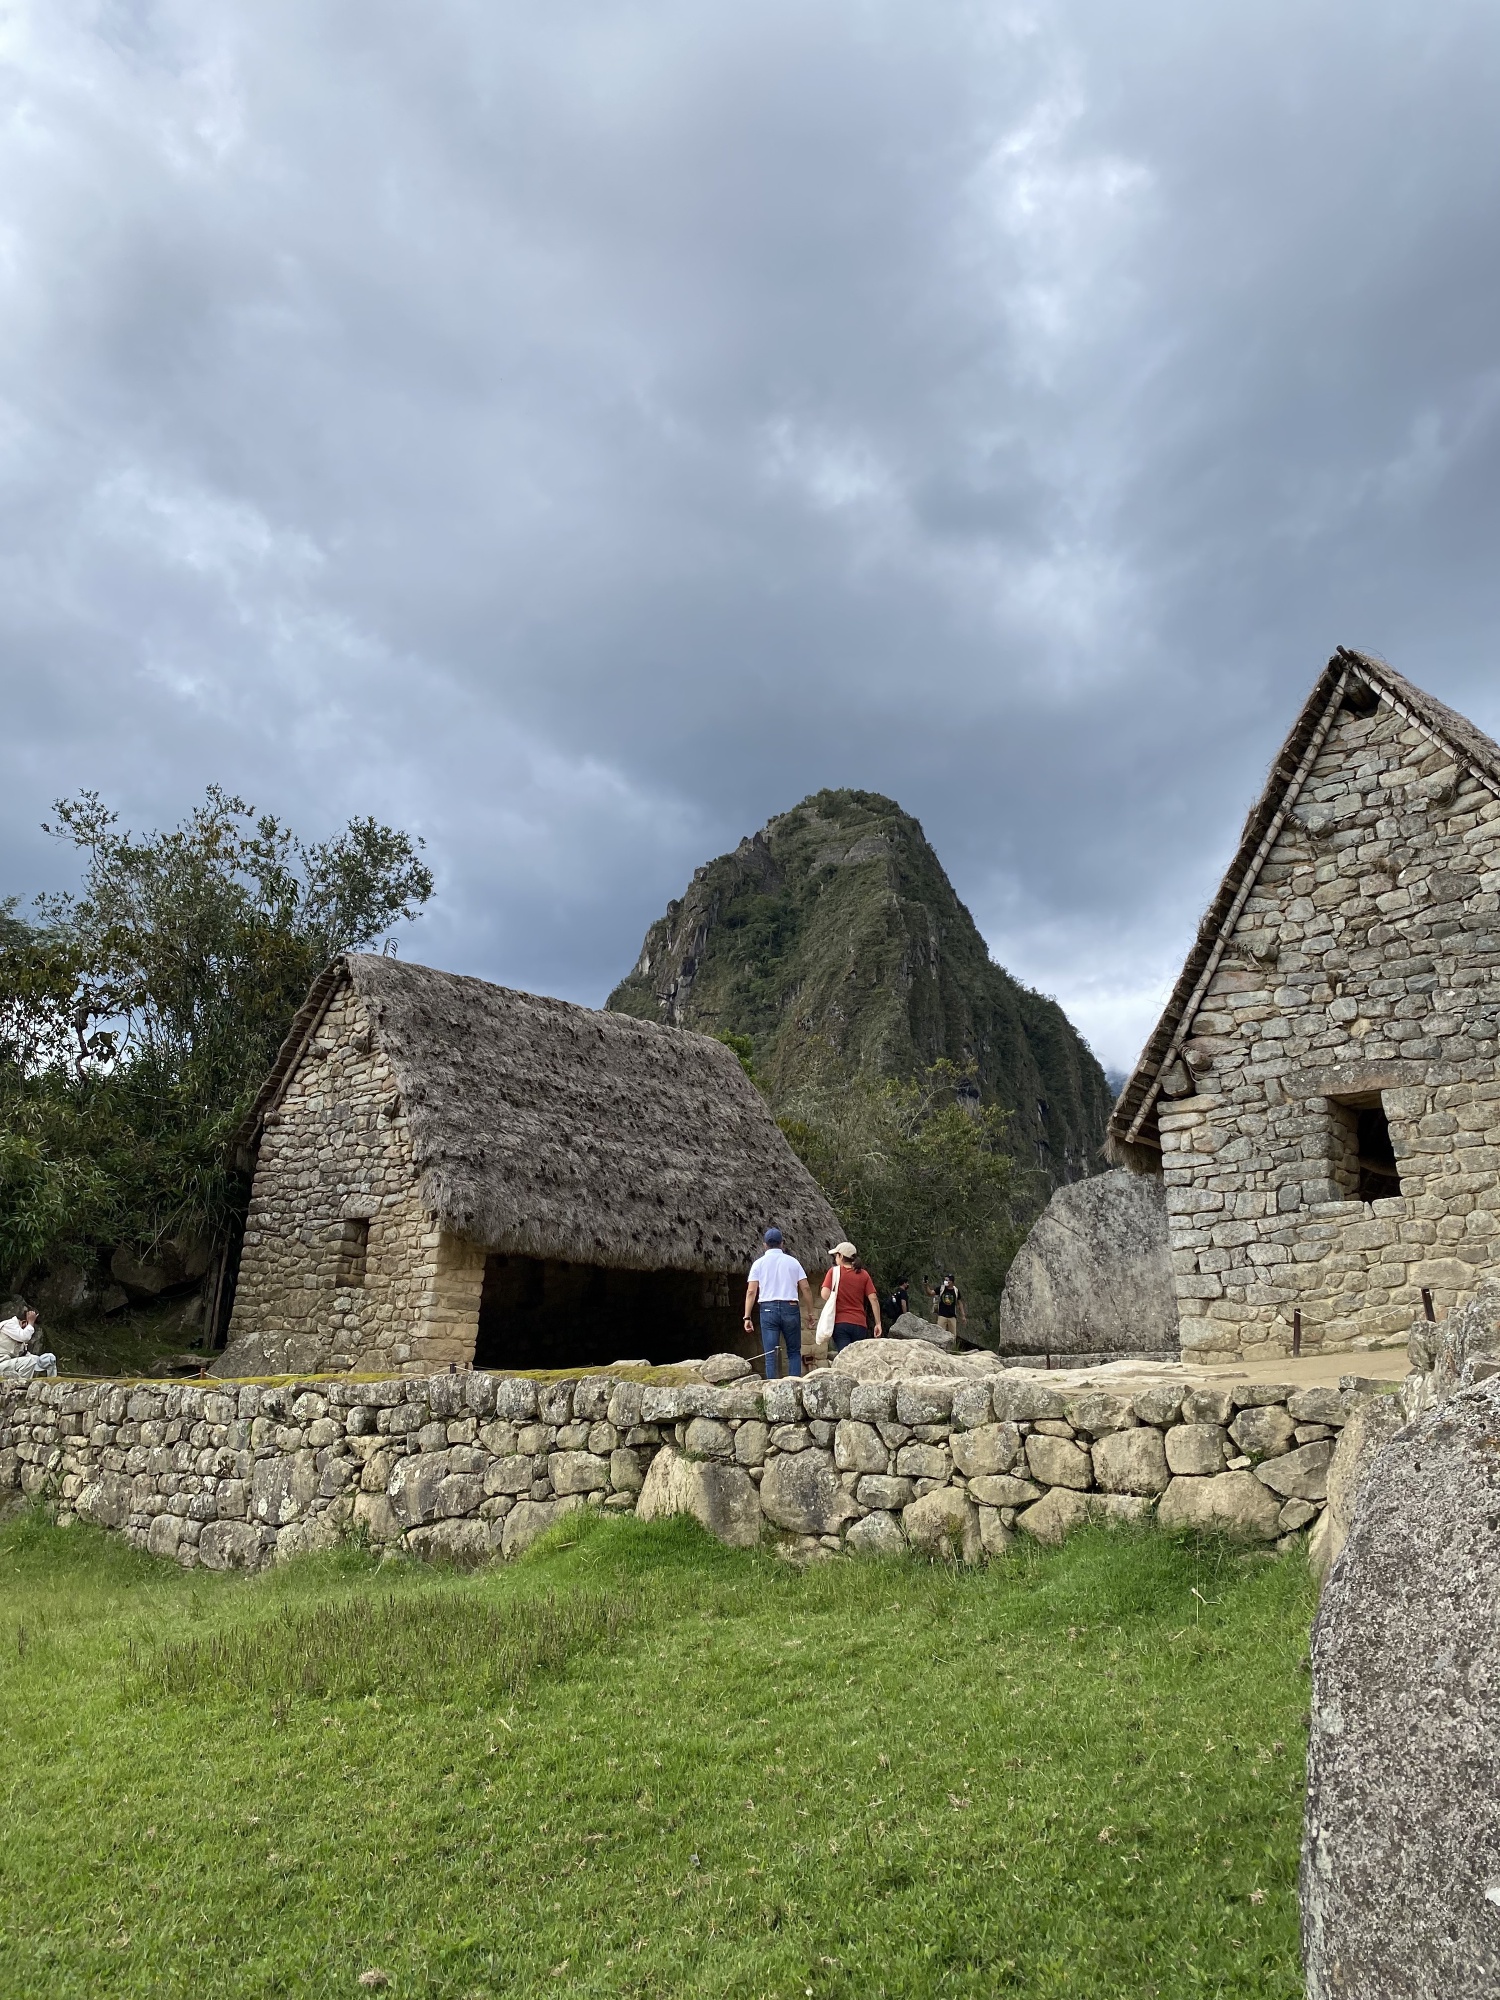 They recreated the thatched roof in this area with the Sacred Rock